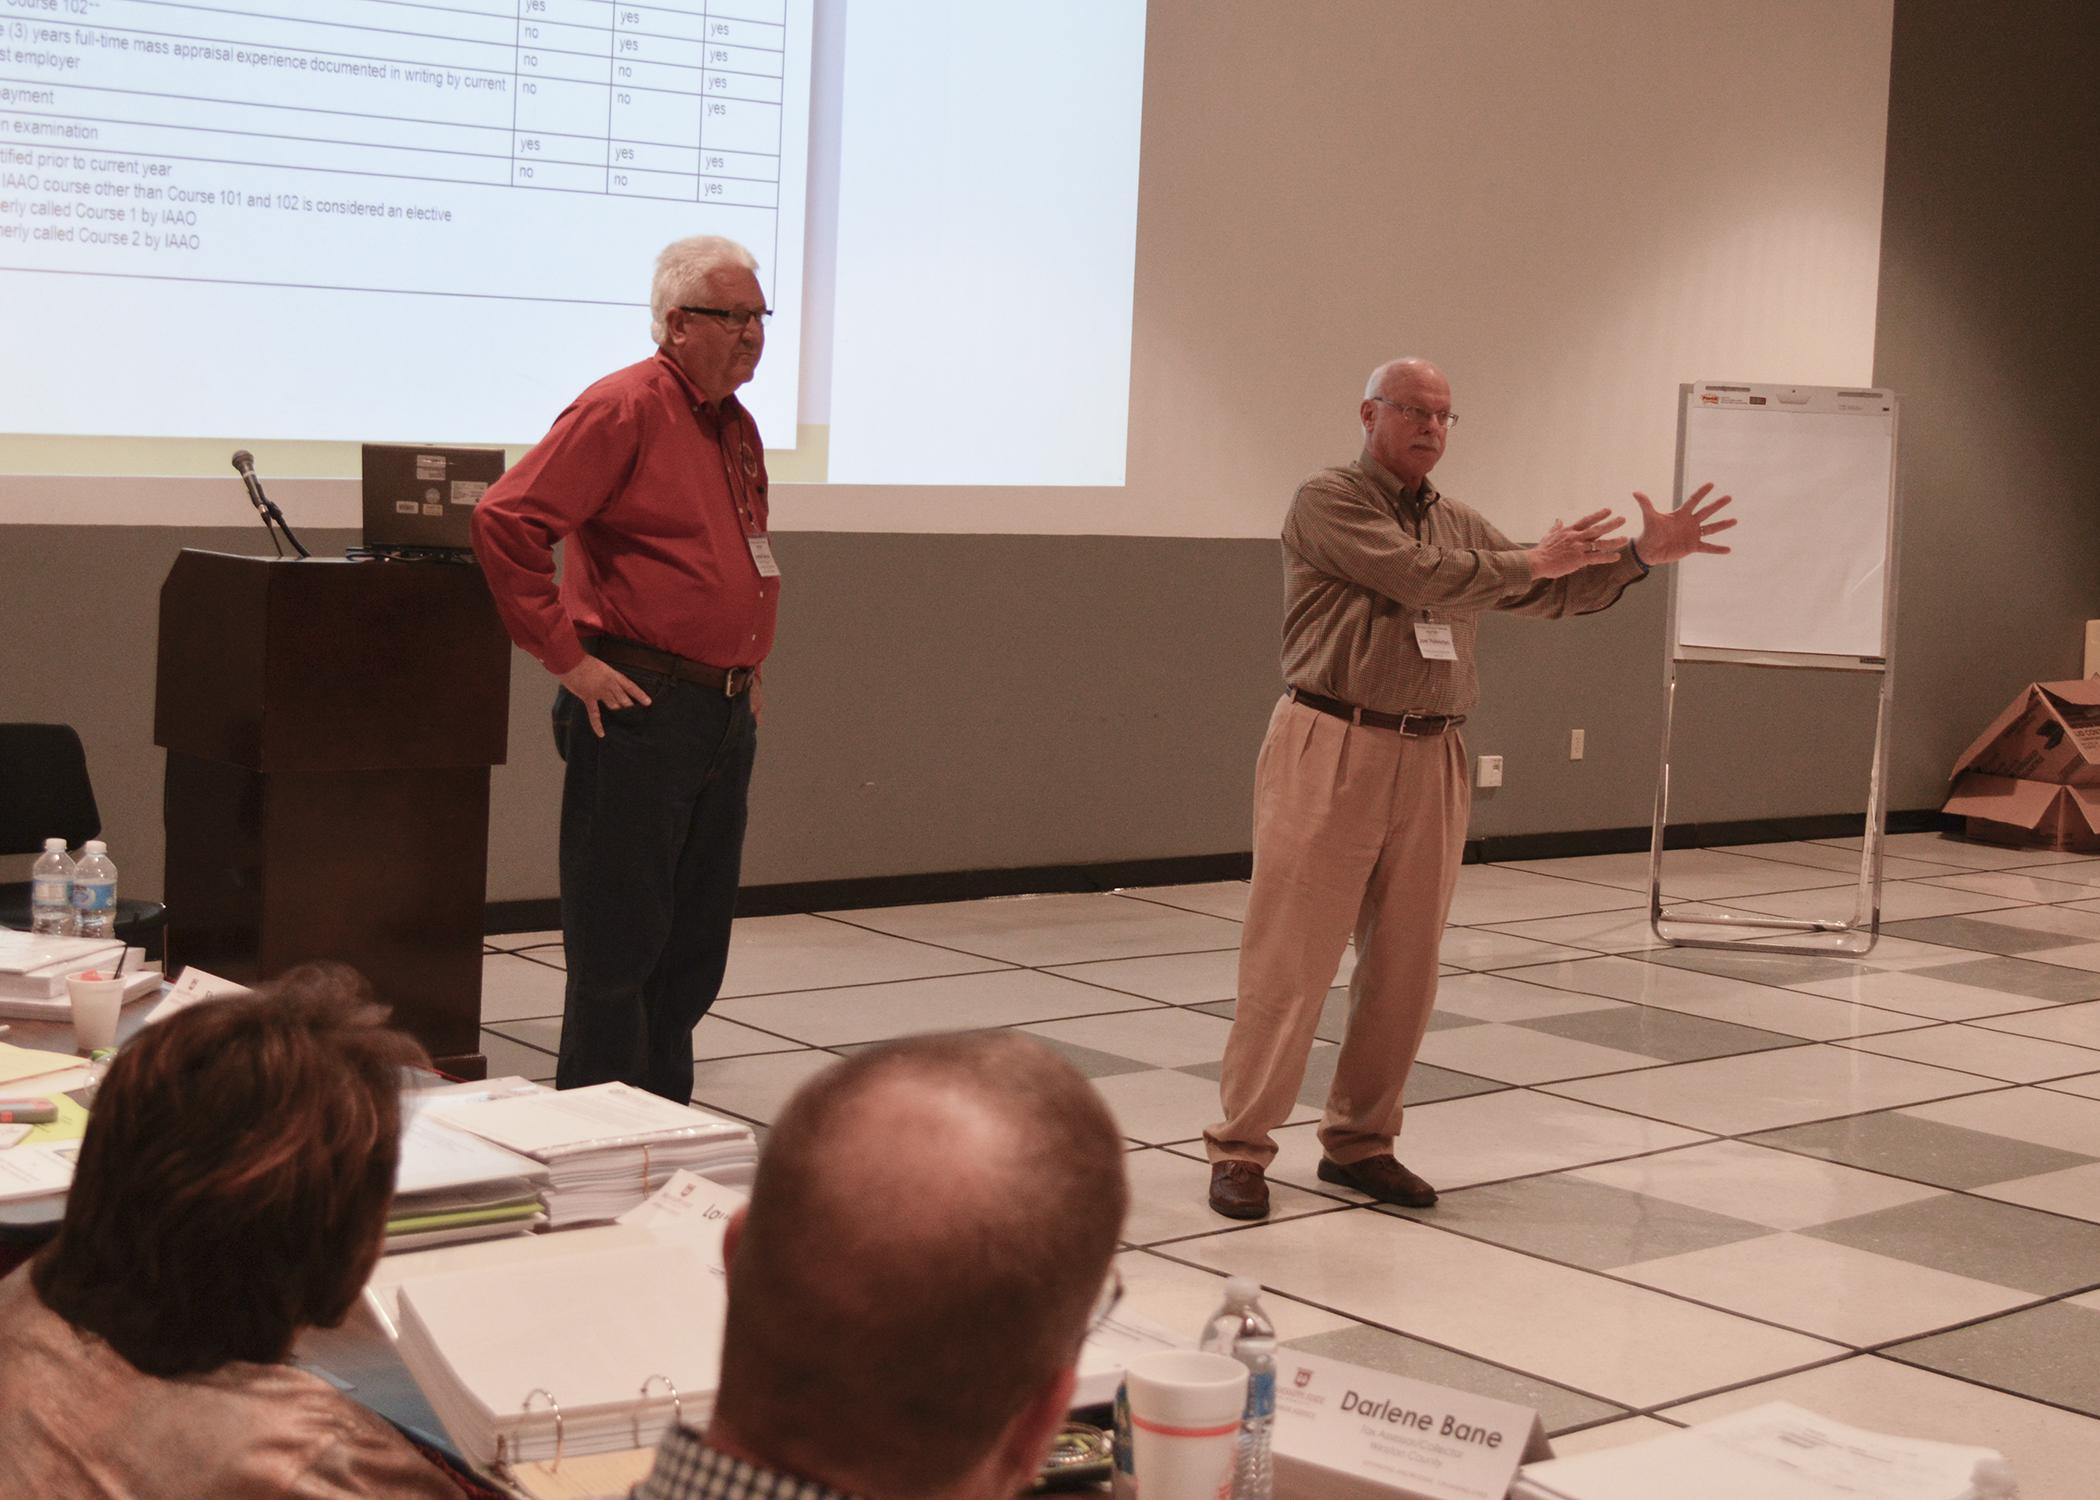 Hancock County tax assessor Jimmie Ladner Jr., left, and Mississippi Assessors and Collectors Association executive director Joel Yelverton brief newly elected tax assessors during a training held at the Mississippi State University Bost Extension Center Nov. 18, 2015. (Photo by Bob Ratliff, MSU Extension)